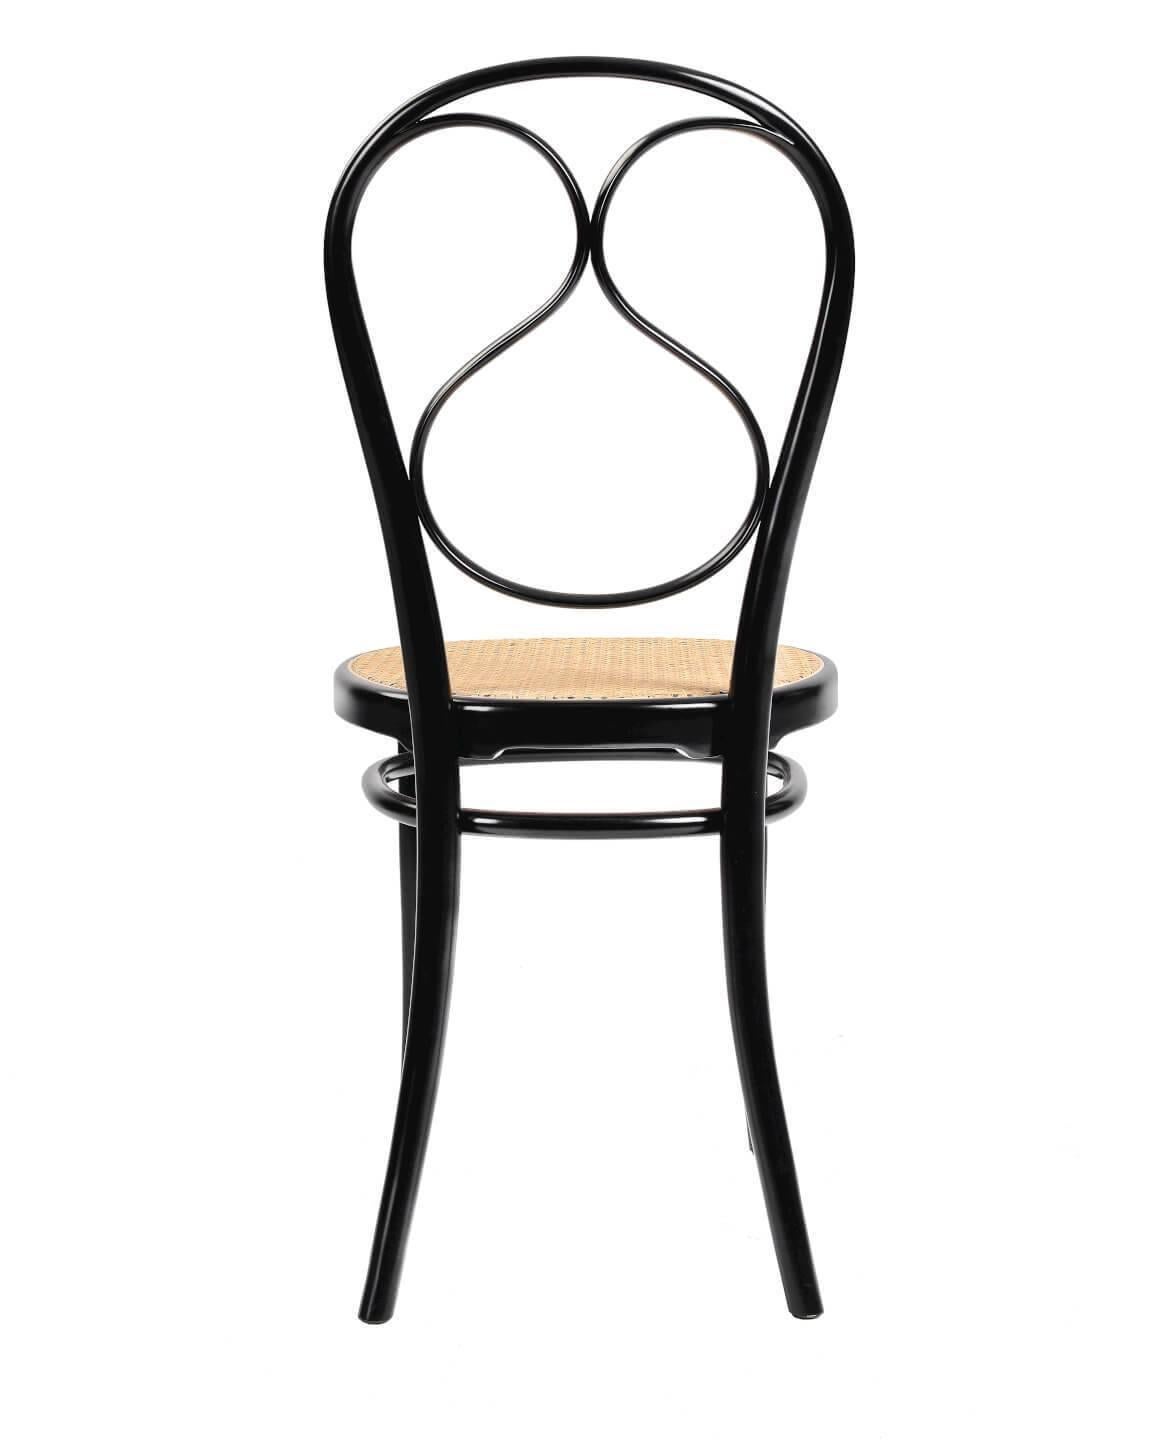 Supple, light, and elegant. This chair, designed in 1849, uses the new technique of steam bent beechwood, and clearly shows the philosophy aimed at simplifying the components to enable mass production. The seat is made from cane.